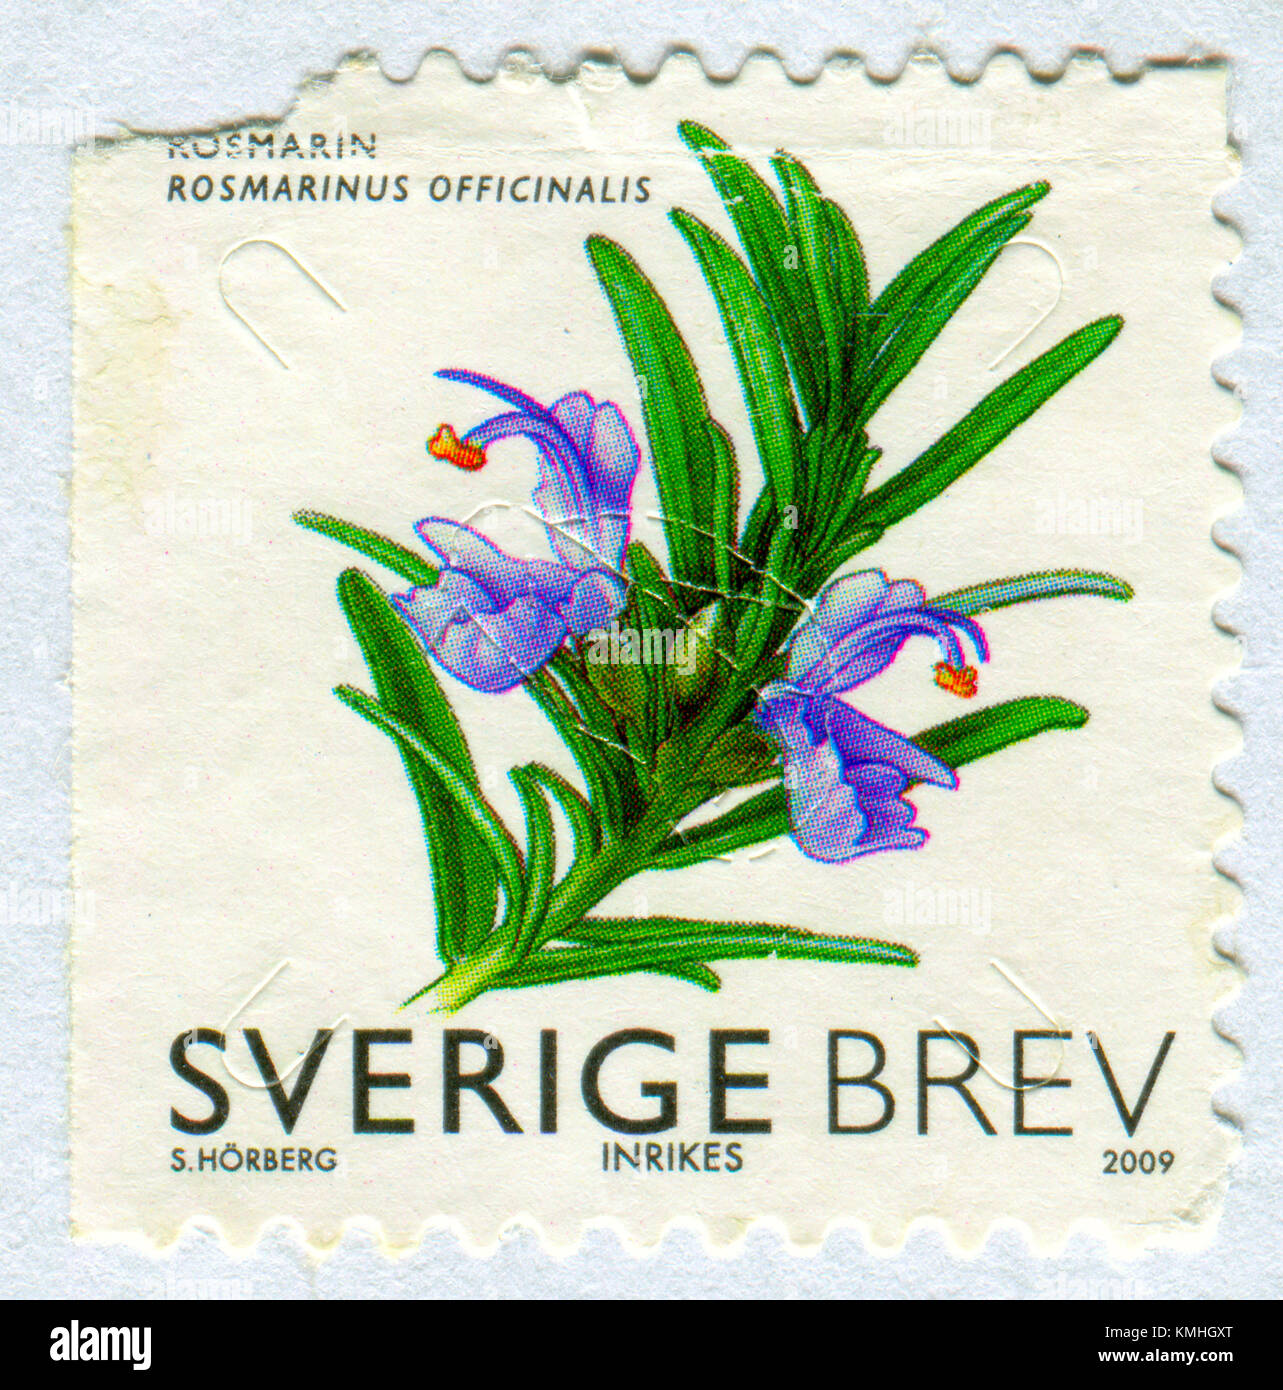 GOMEL, BELARUS, 6 DECEMBER 2017, Stamp printed in Sweden shows image of the Rosmarin, circa 2009. Stock Photo